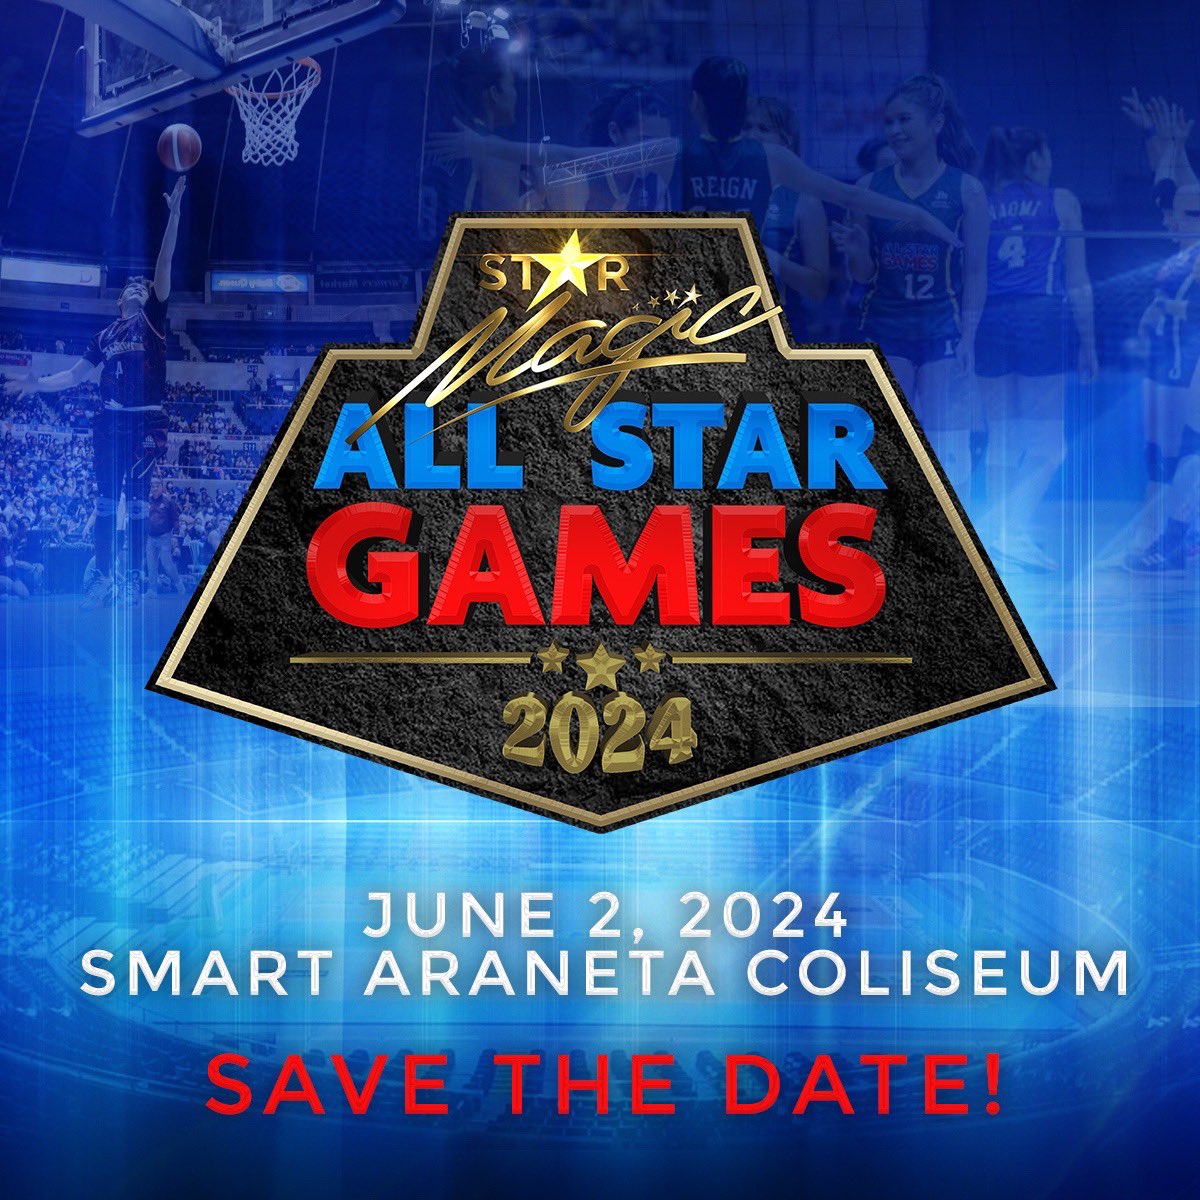 Time to gear up because the most epic sporting event of the year is back! 🏀🏐🏅 Don't miss out on the STAR MAGIC ALL STAR GAMES, happening on June 2, 2024, at the Araneta Coliseum! Stay tuned for ticket selling details! #StarMagic #StarMagicAllStarGames2024